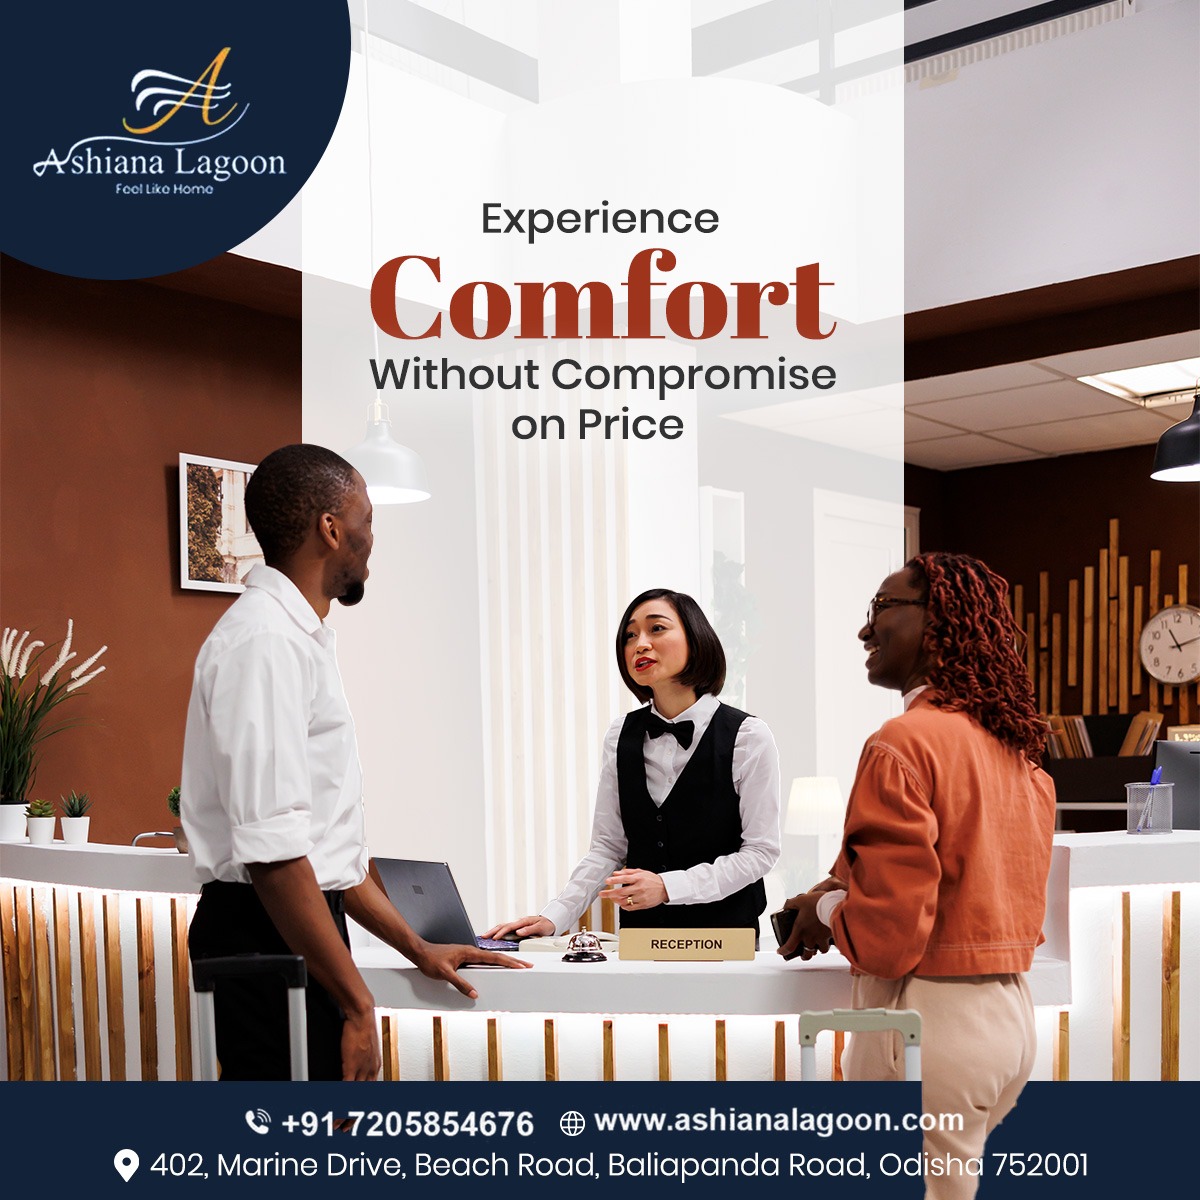 We believe in providing top-notch comfort at a price that suits every budget. Join us for an unforgettable stay without compromise.
𝐓𝐨 𝐛𝐨𝐨𝐤:
𝐂𝐚𝐥𝐥: 72058 54676

#AshianaLagoon #AffordableLuxury #ComfortForAll #LuxuryOnABudget #BudgetFriendlyStay #ValueForMoney